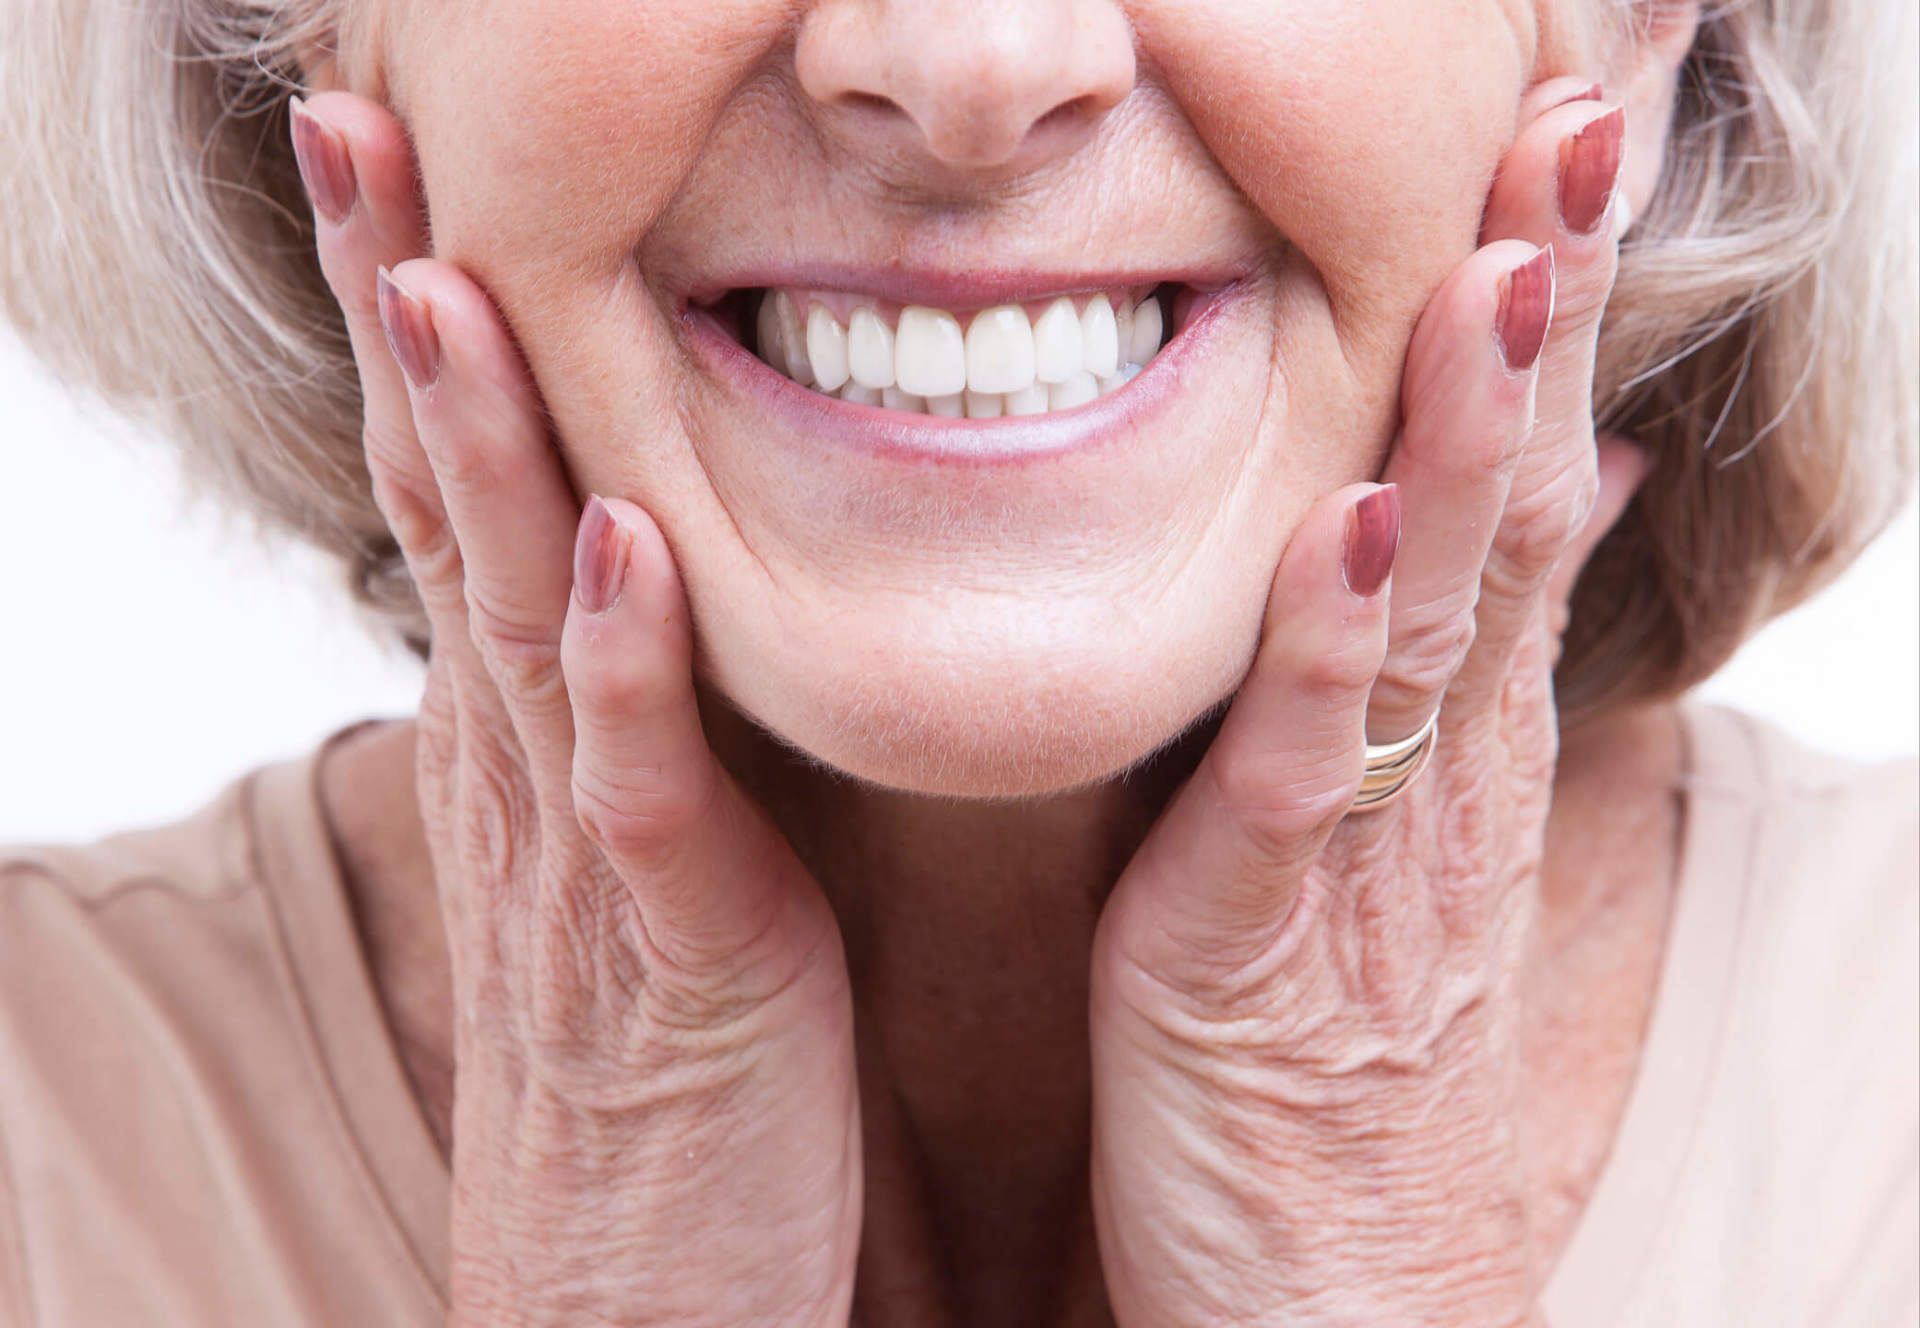 Matured lady wearing dentures - Dentist in Grayslake, IL